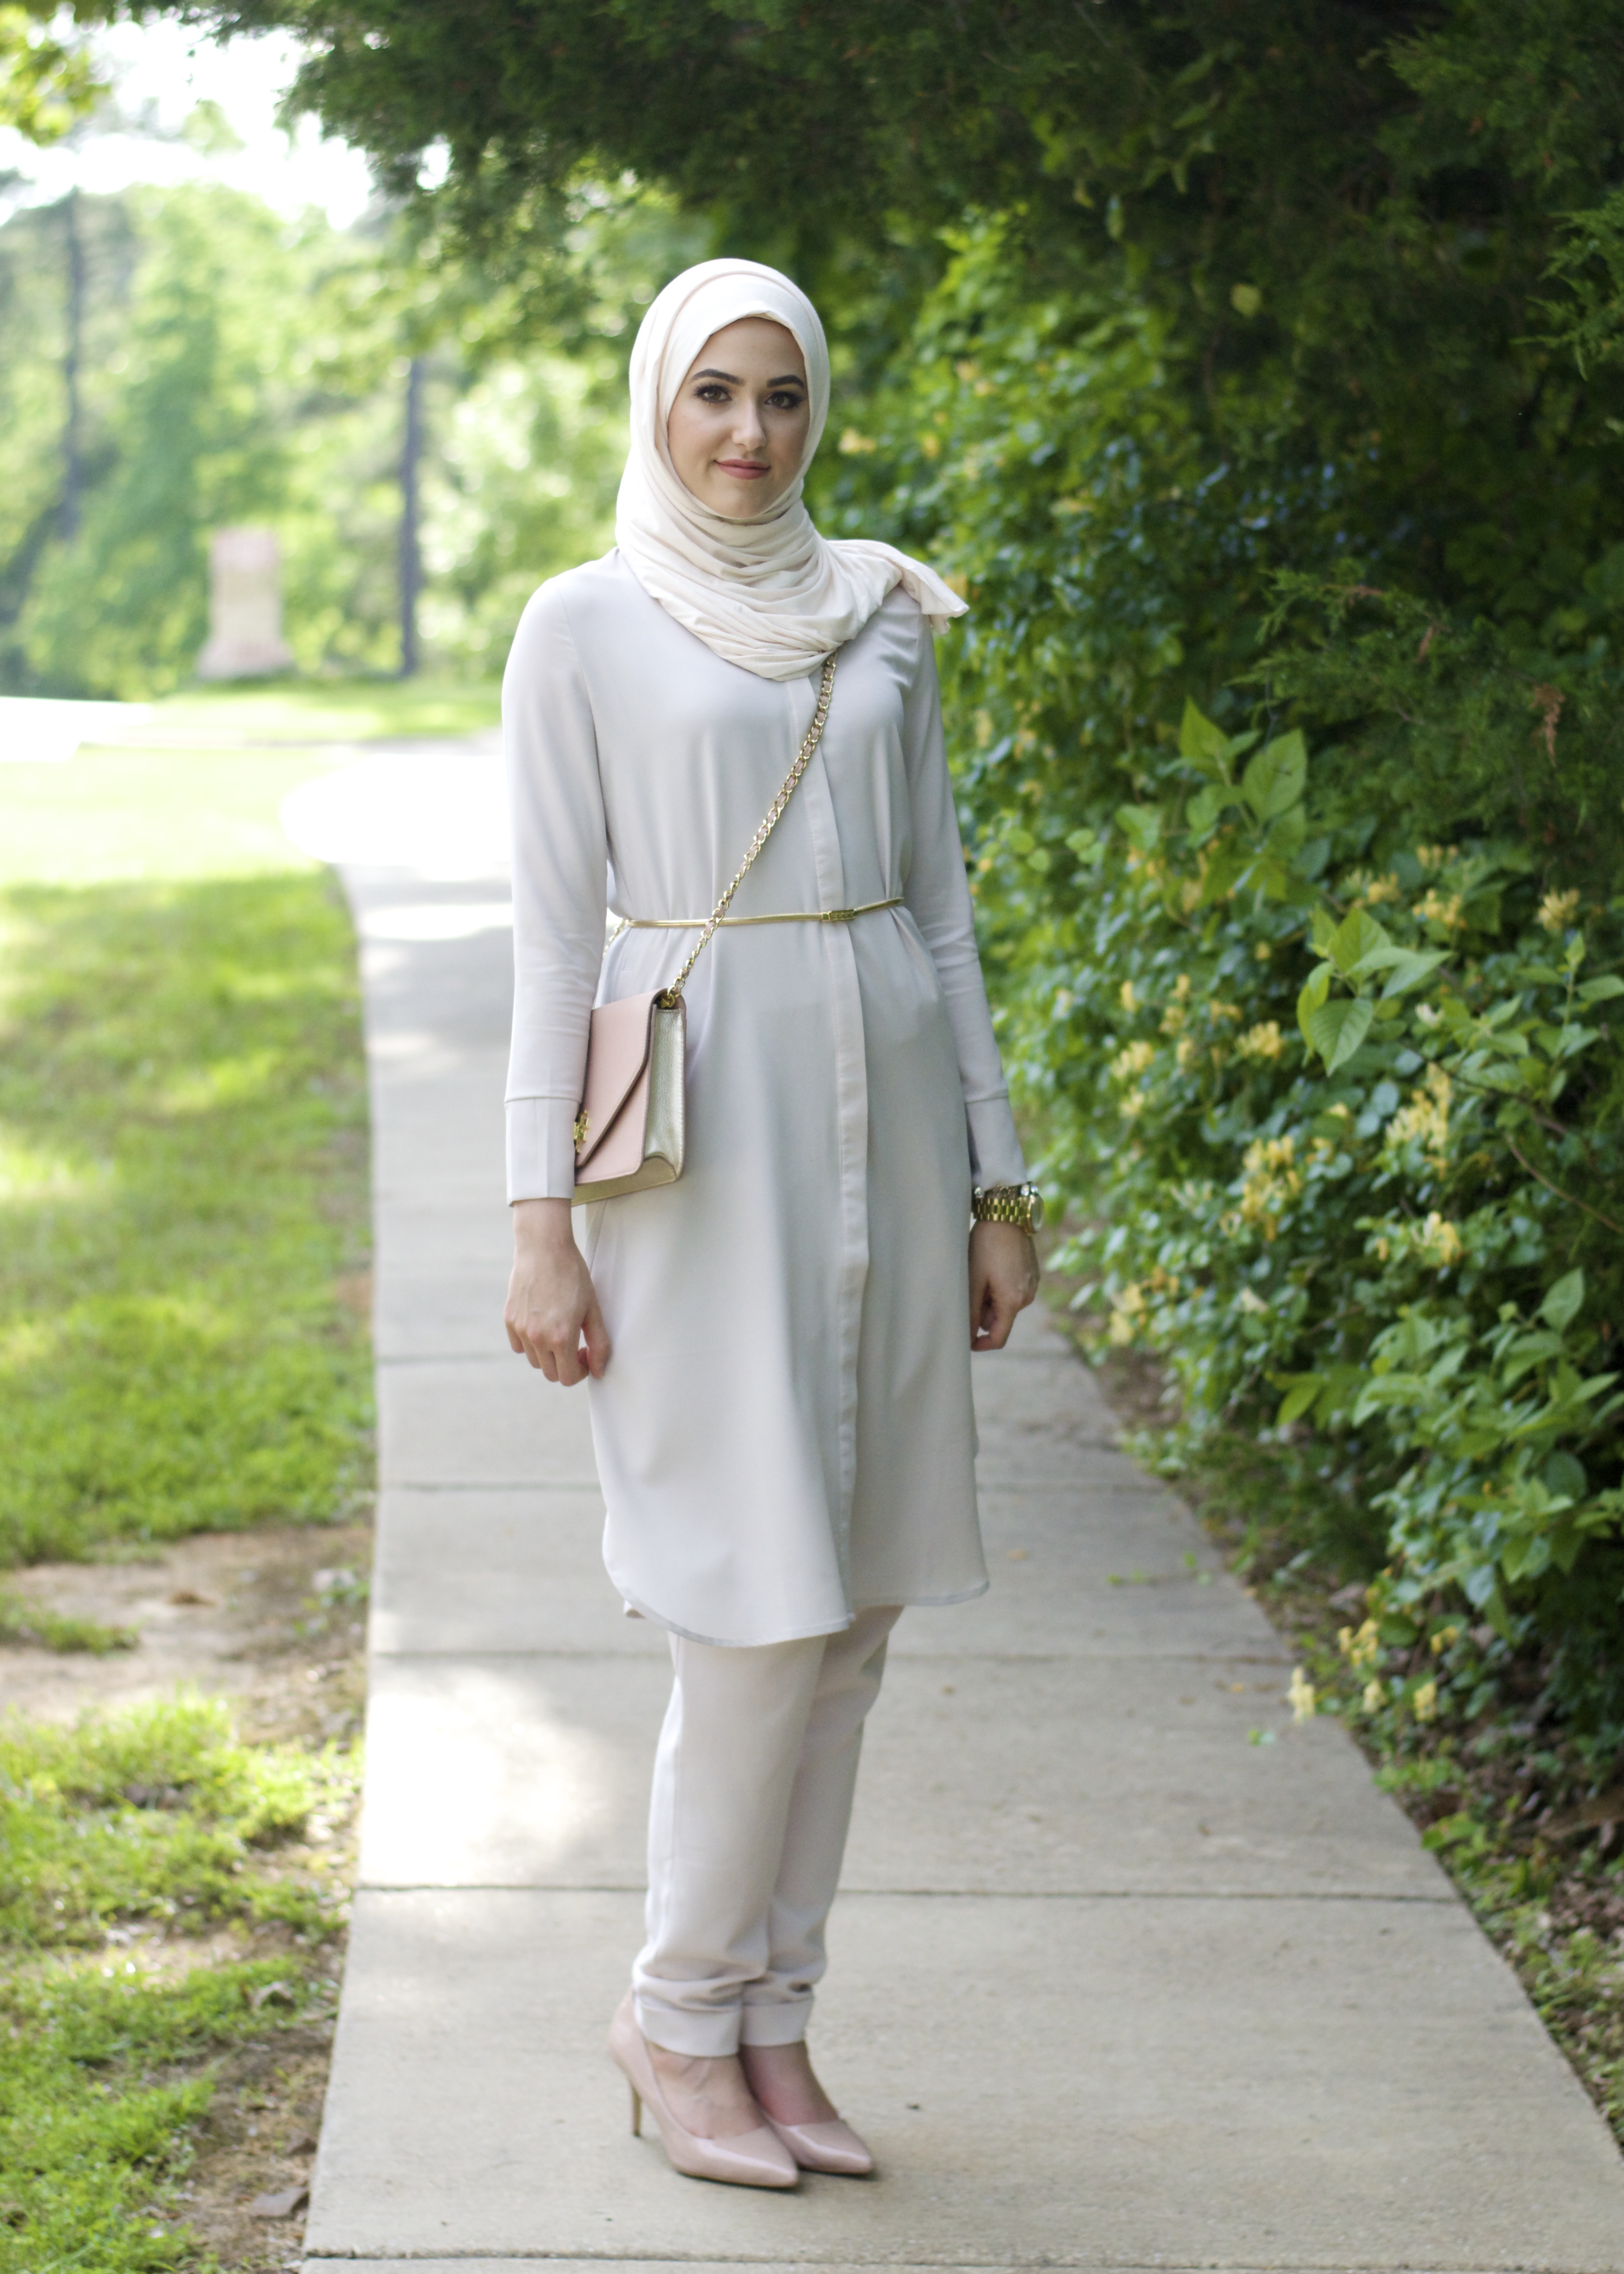 Women who wear hijabs , how do you deal with going outside in the ...